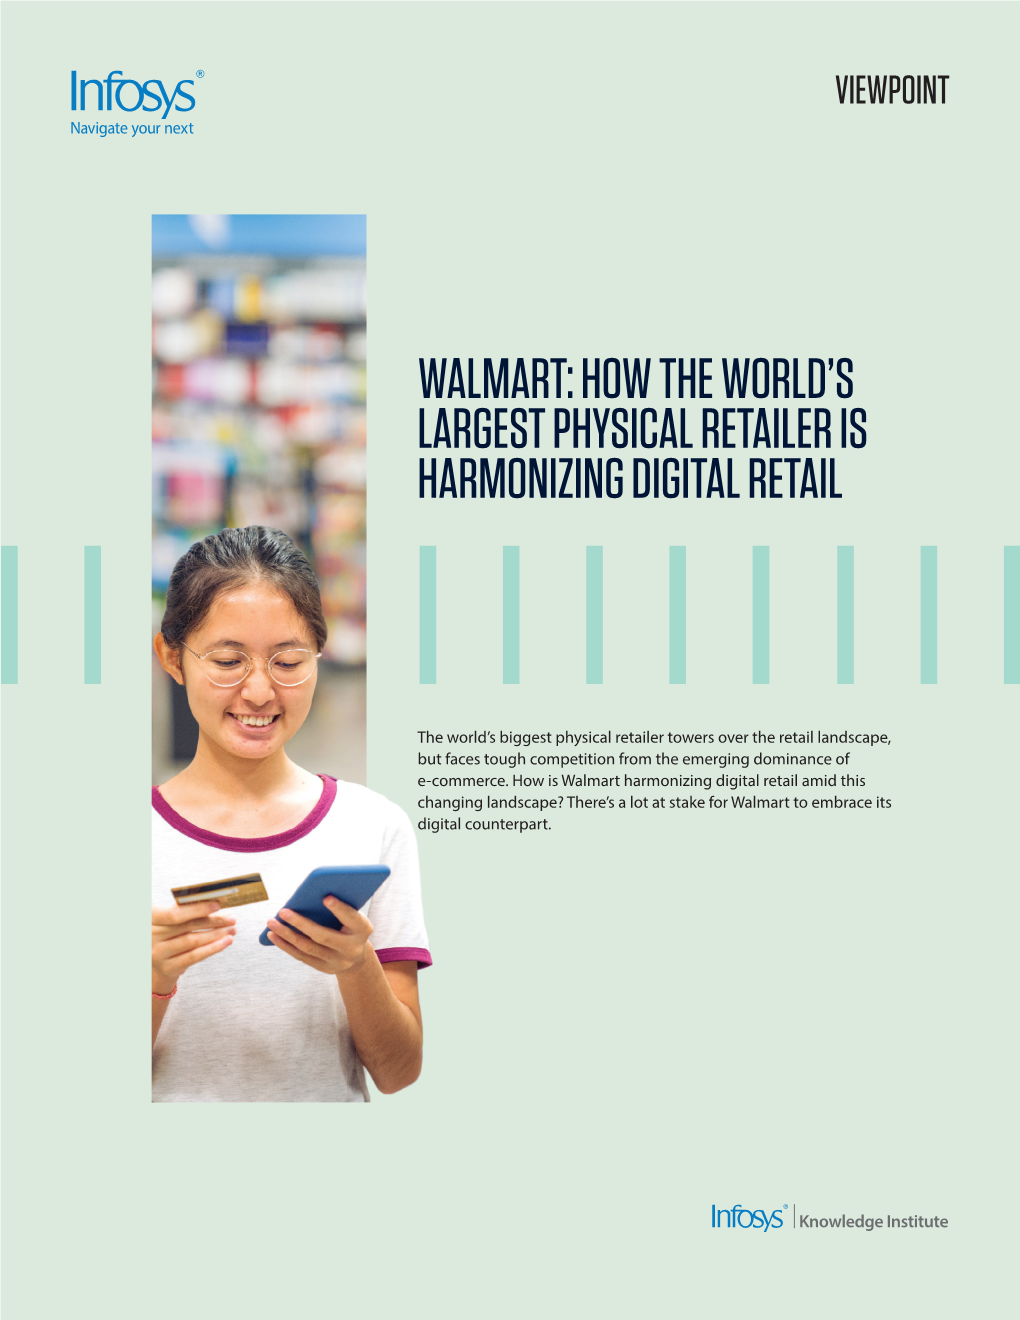 Walmart How the World's Largest Physical Retailer Is Harmonizing Digital Retail